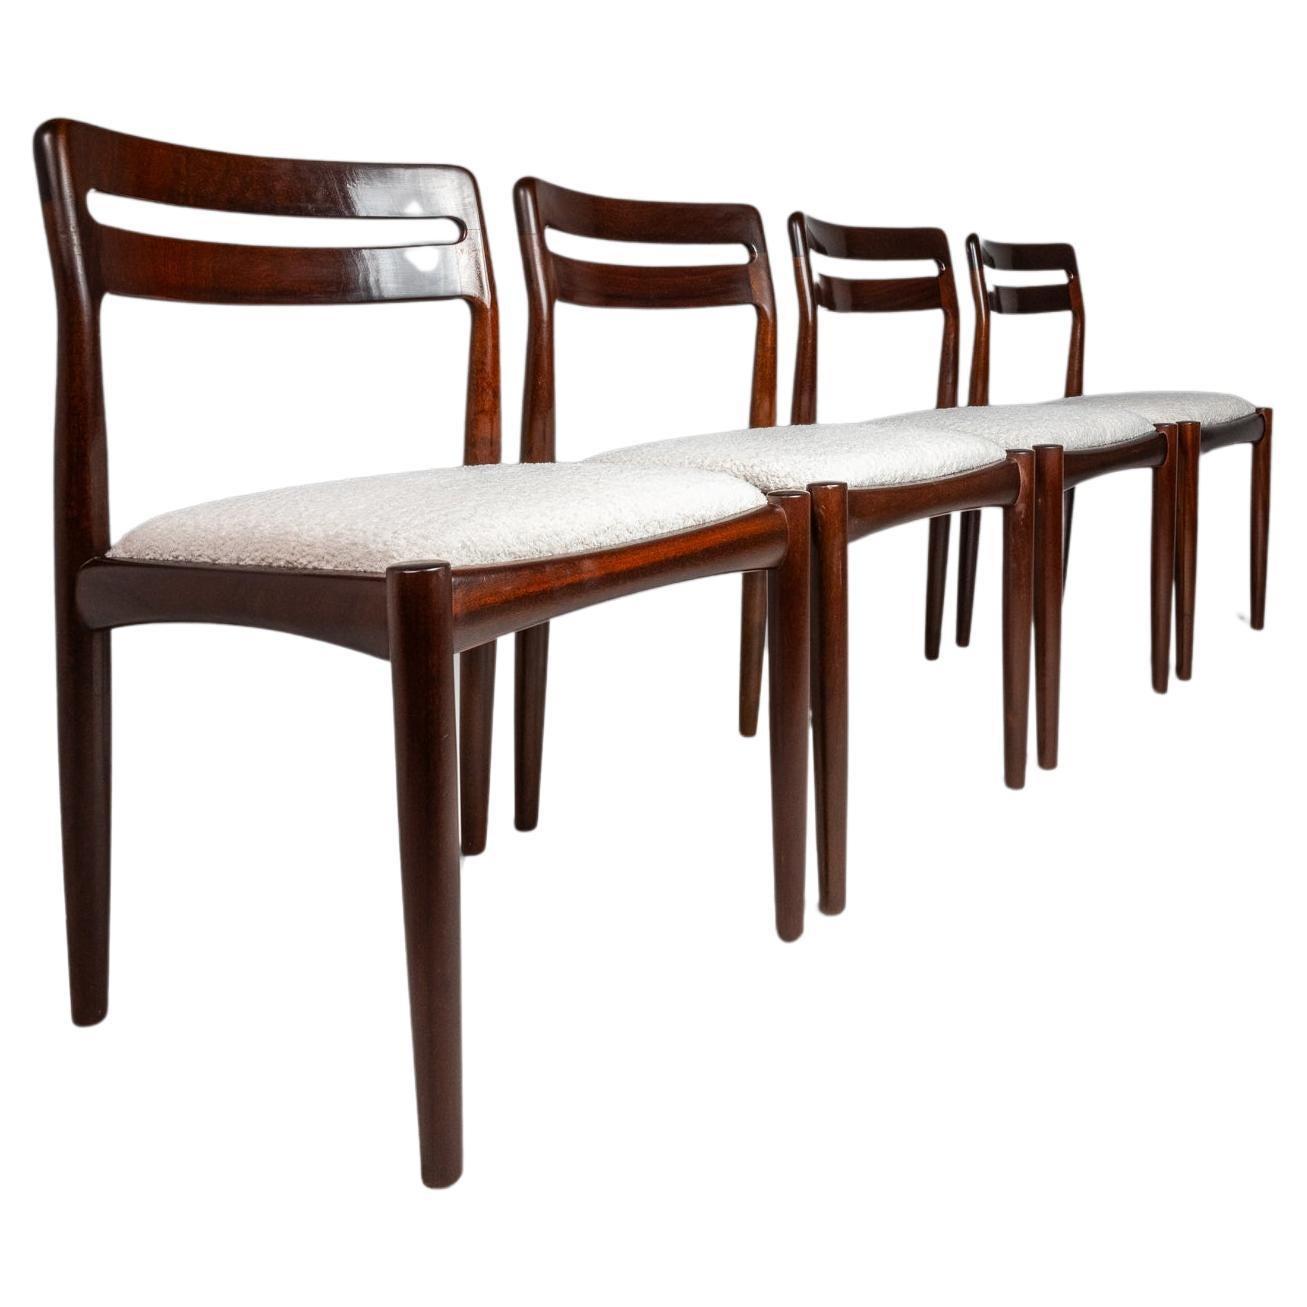 Set of 4 Model 382 Dining Chairs in Mahogany by H.W. Klein, Denmark, c. 1960s